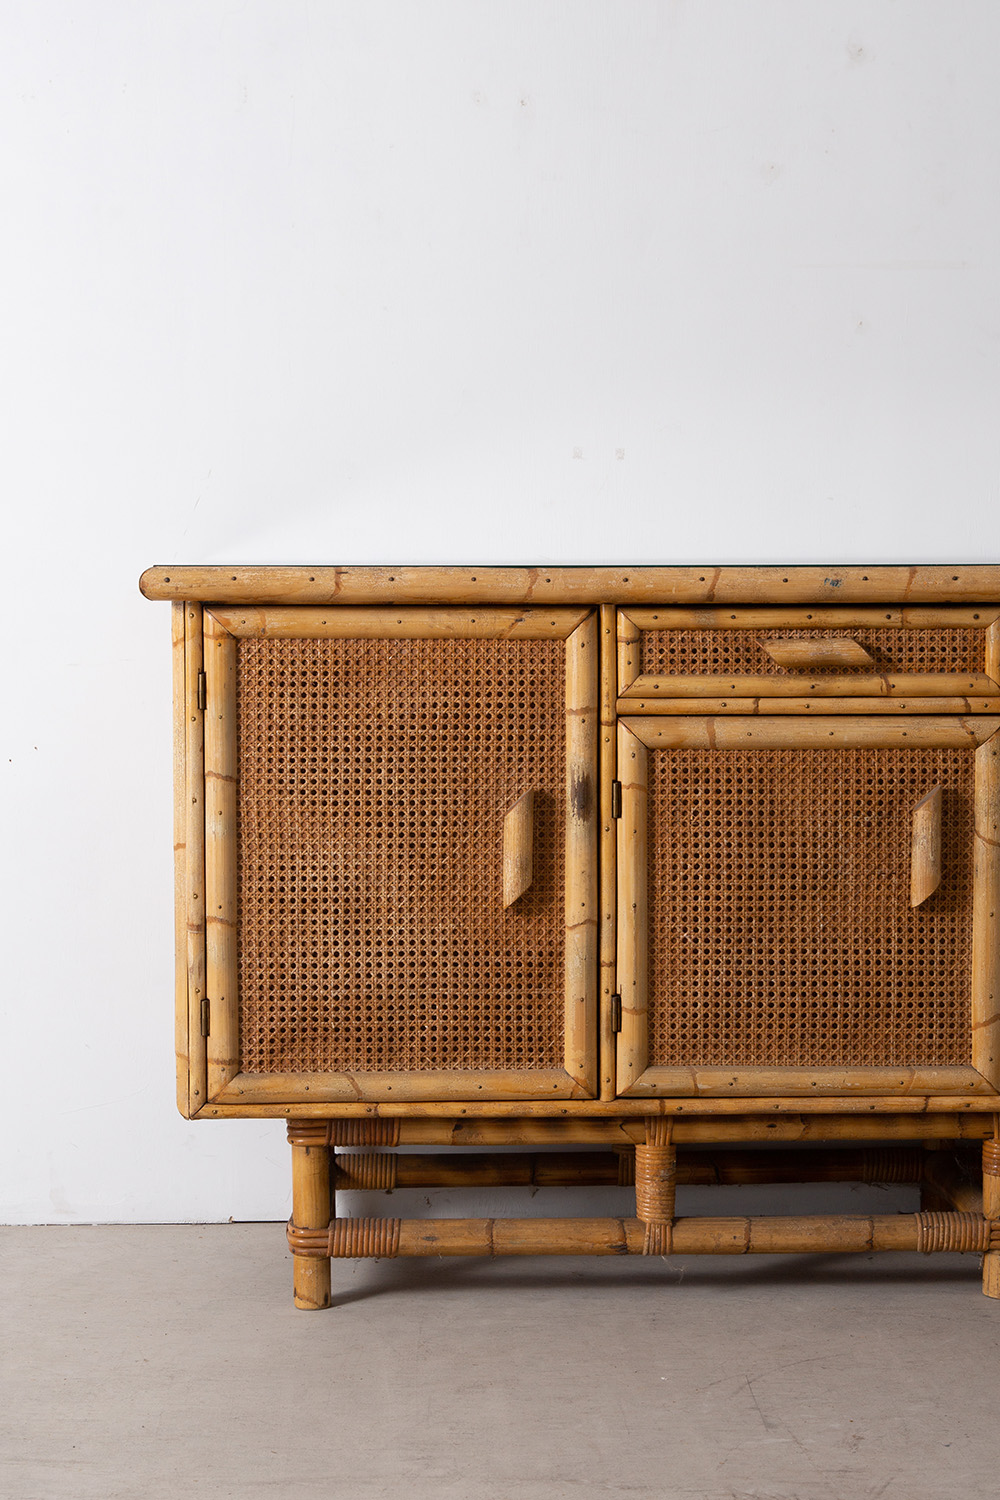 Audoux & Minet Style Vintage Sideboard in Rattan and Wood